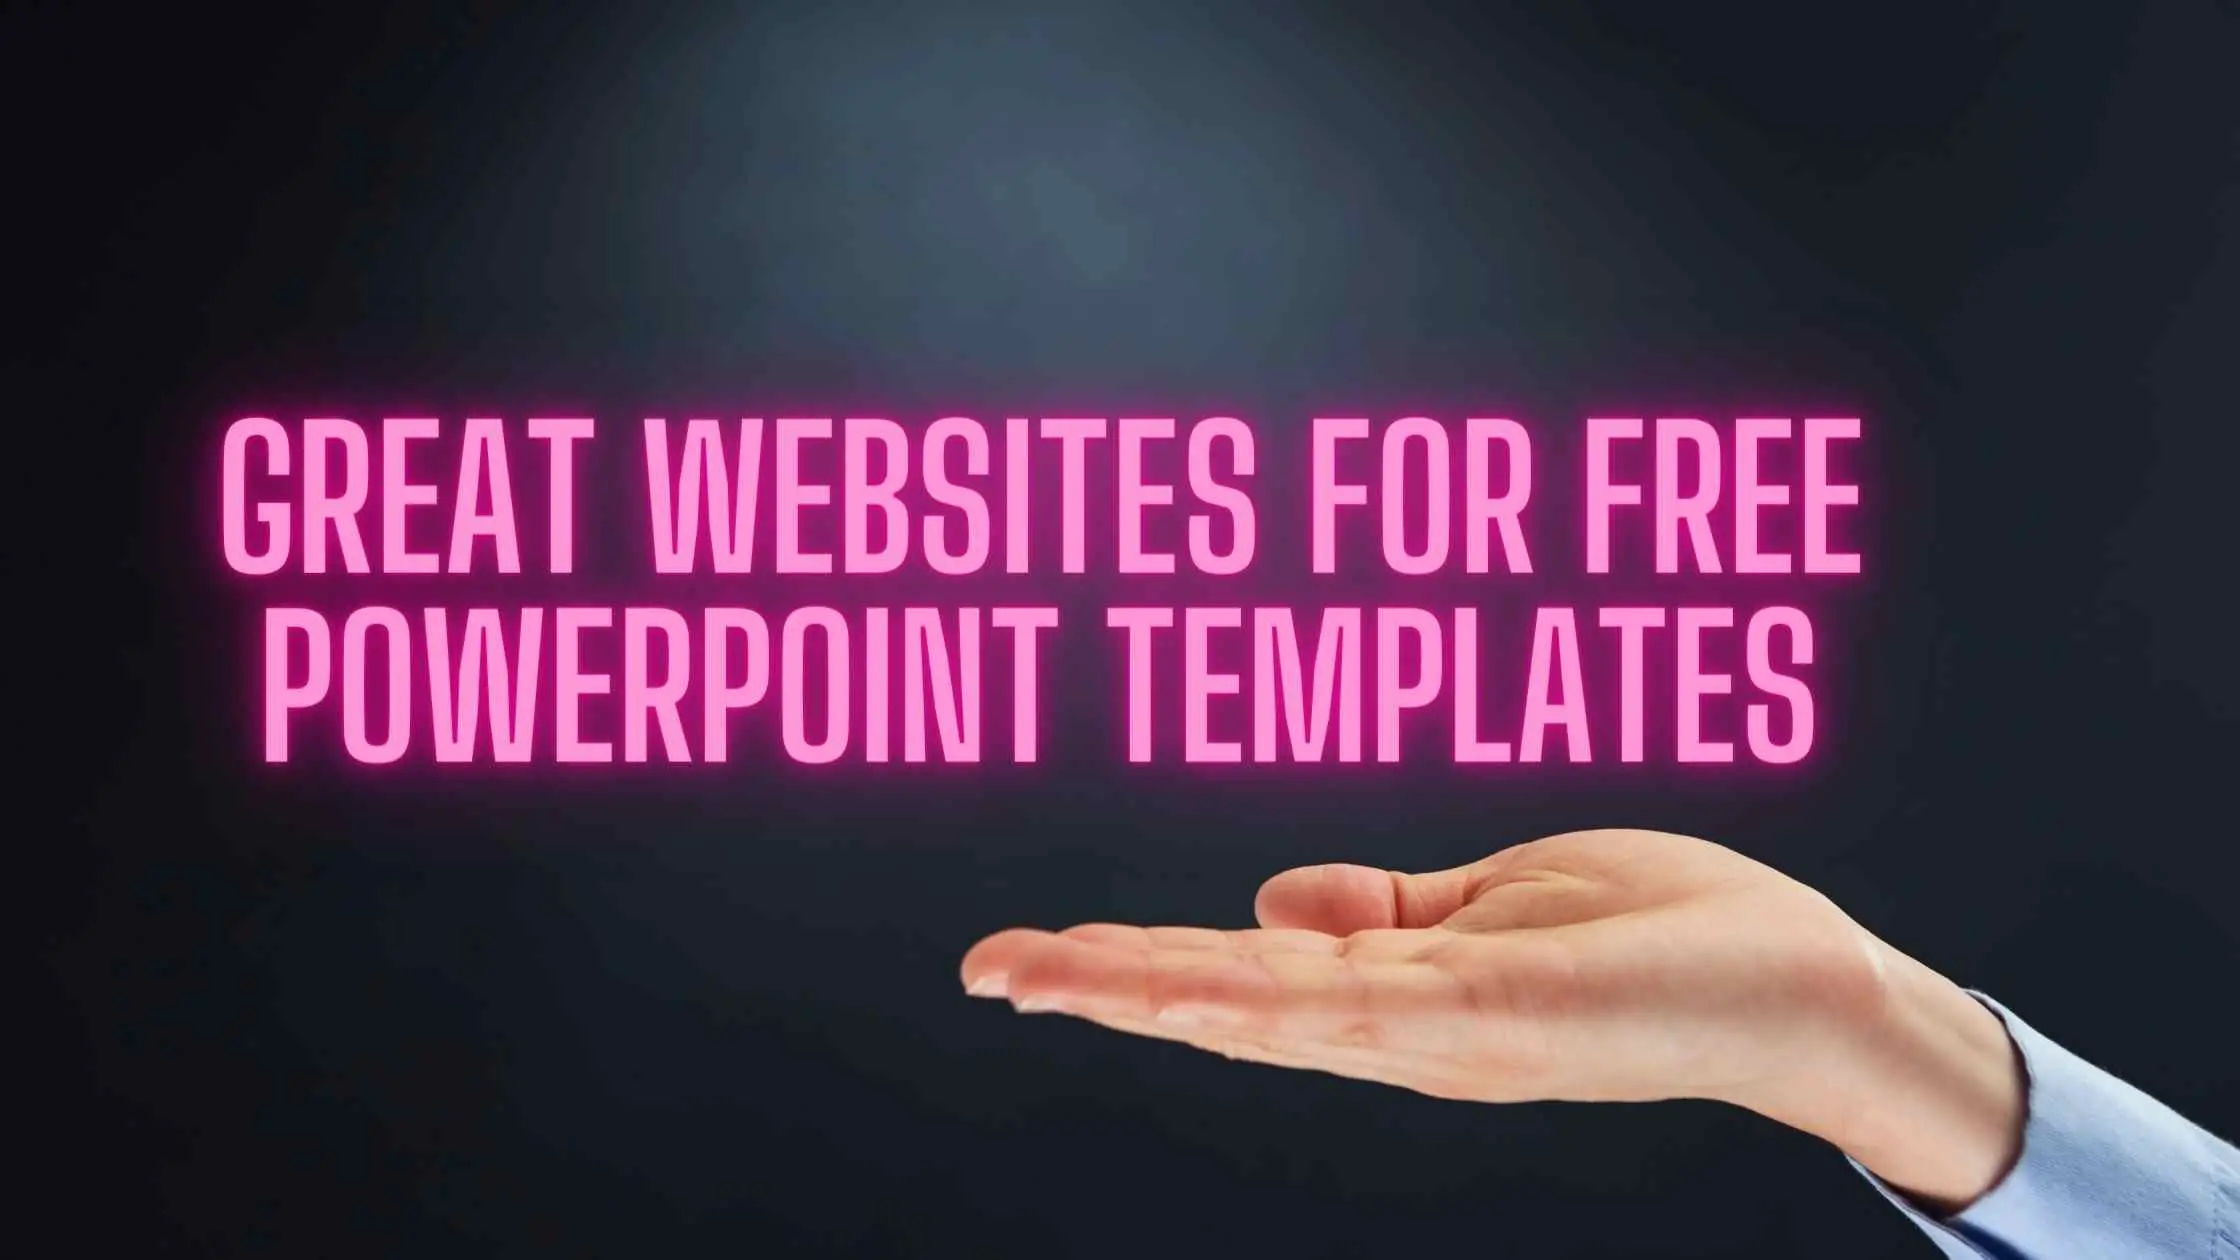 11 Of The Best Websites For Free Powerpoint Templates